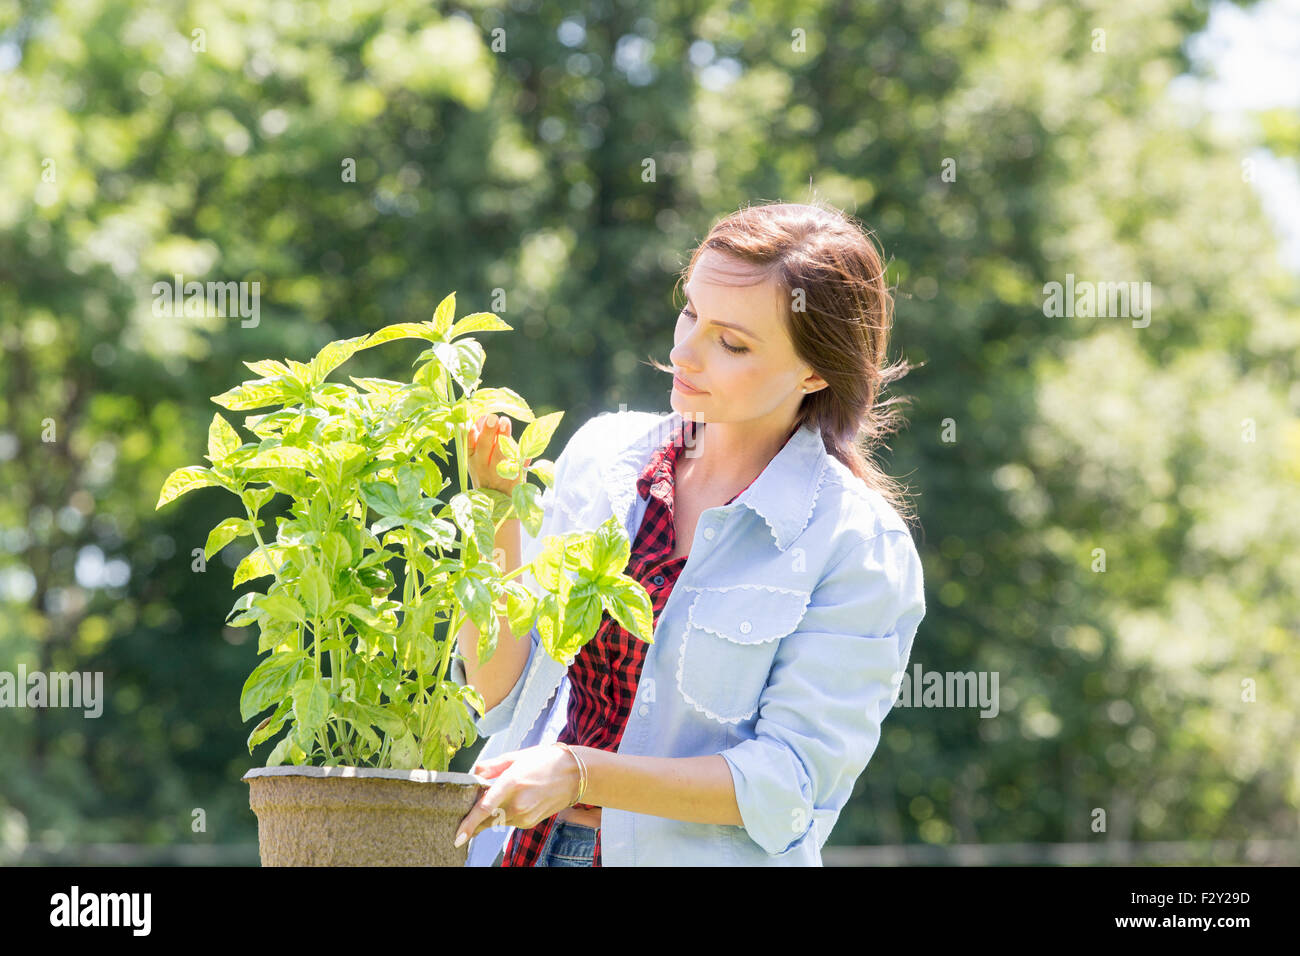 A young woman standing in a garden tending a plant in a pot. Stock Photo